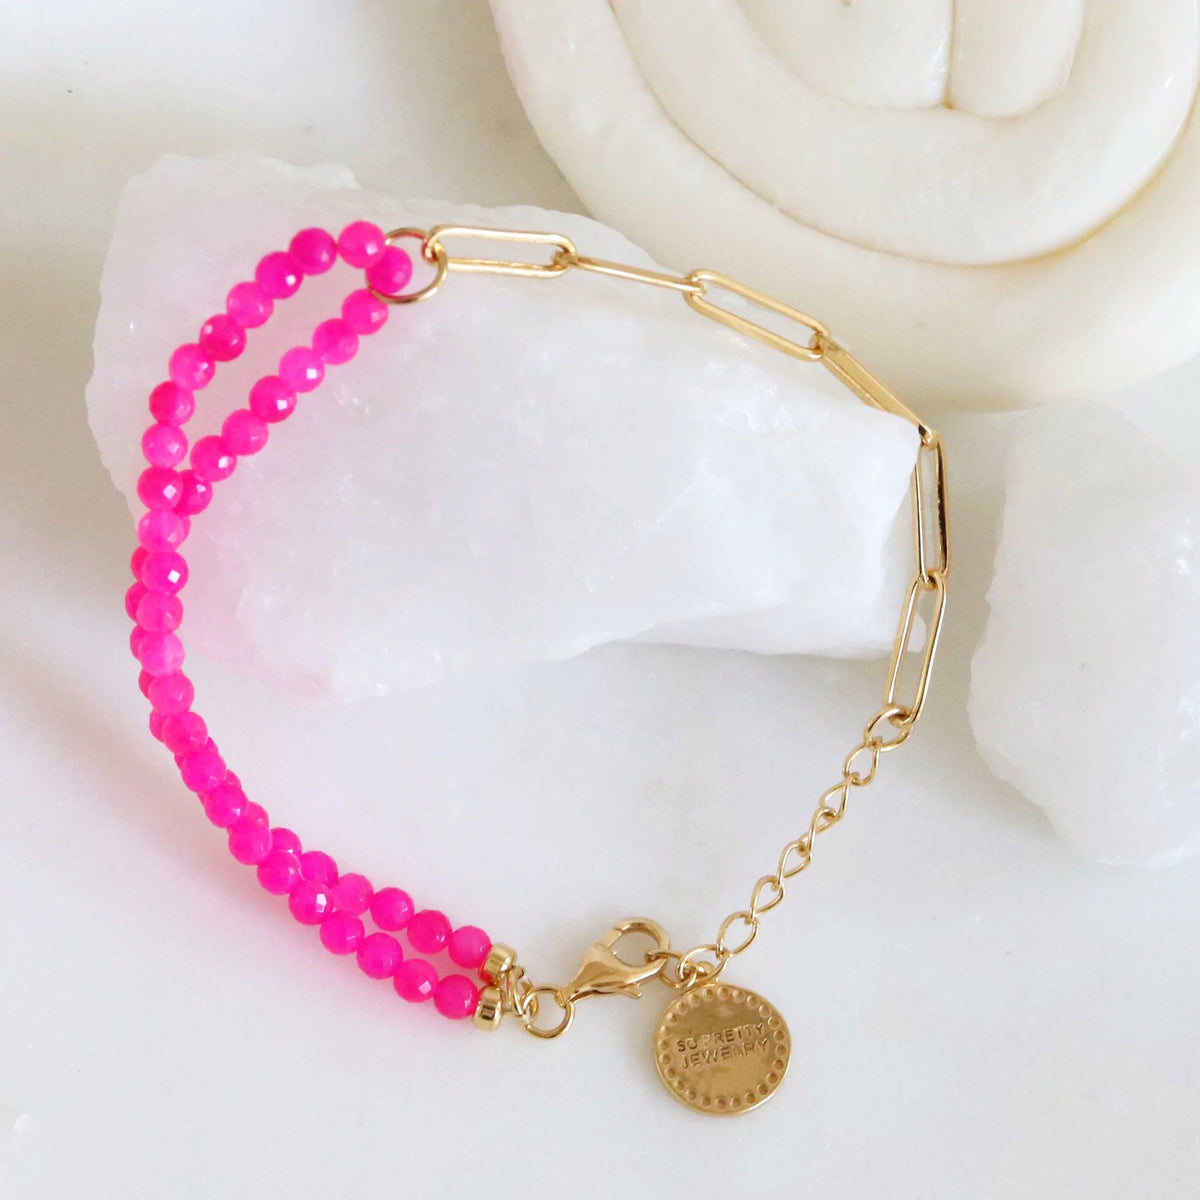 POISE BEADED LINK BRACELET - HOT PINK CHALCEDONY &amp; GOLD 7-8&quot; - SO PRETTY CARA COTTER